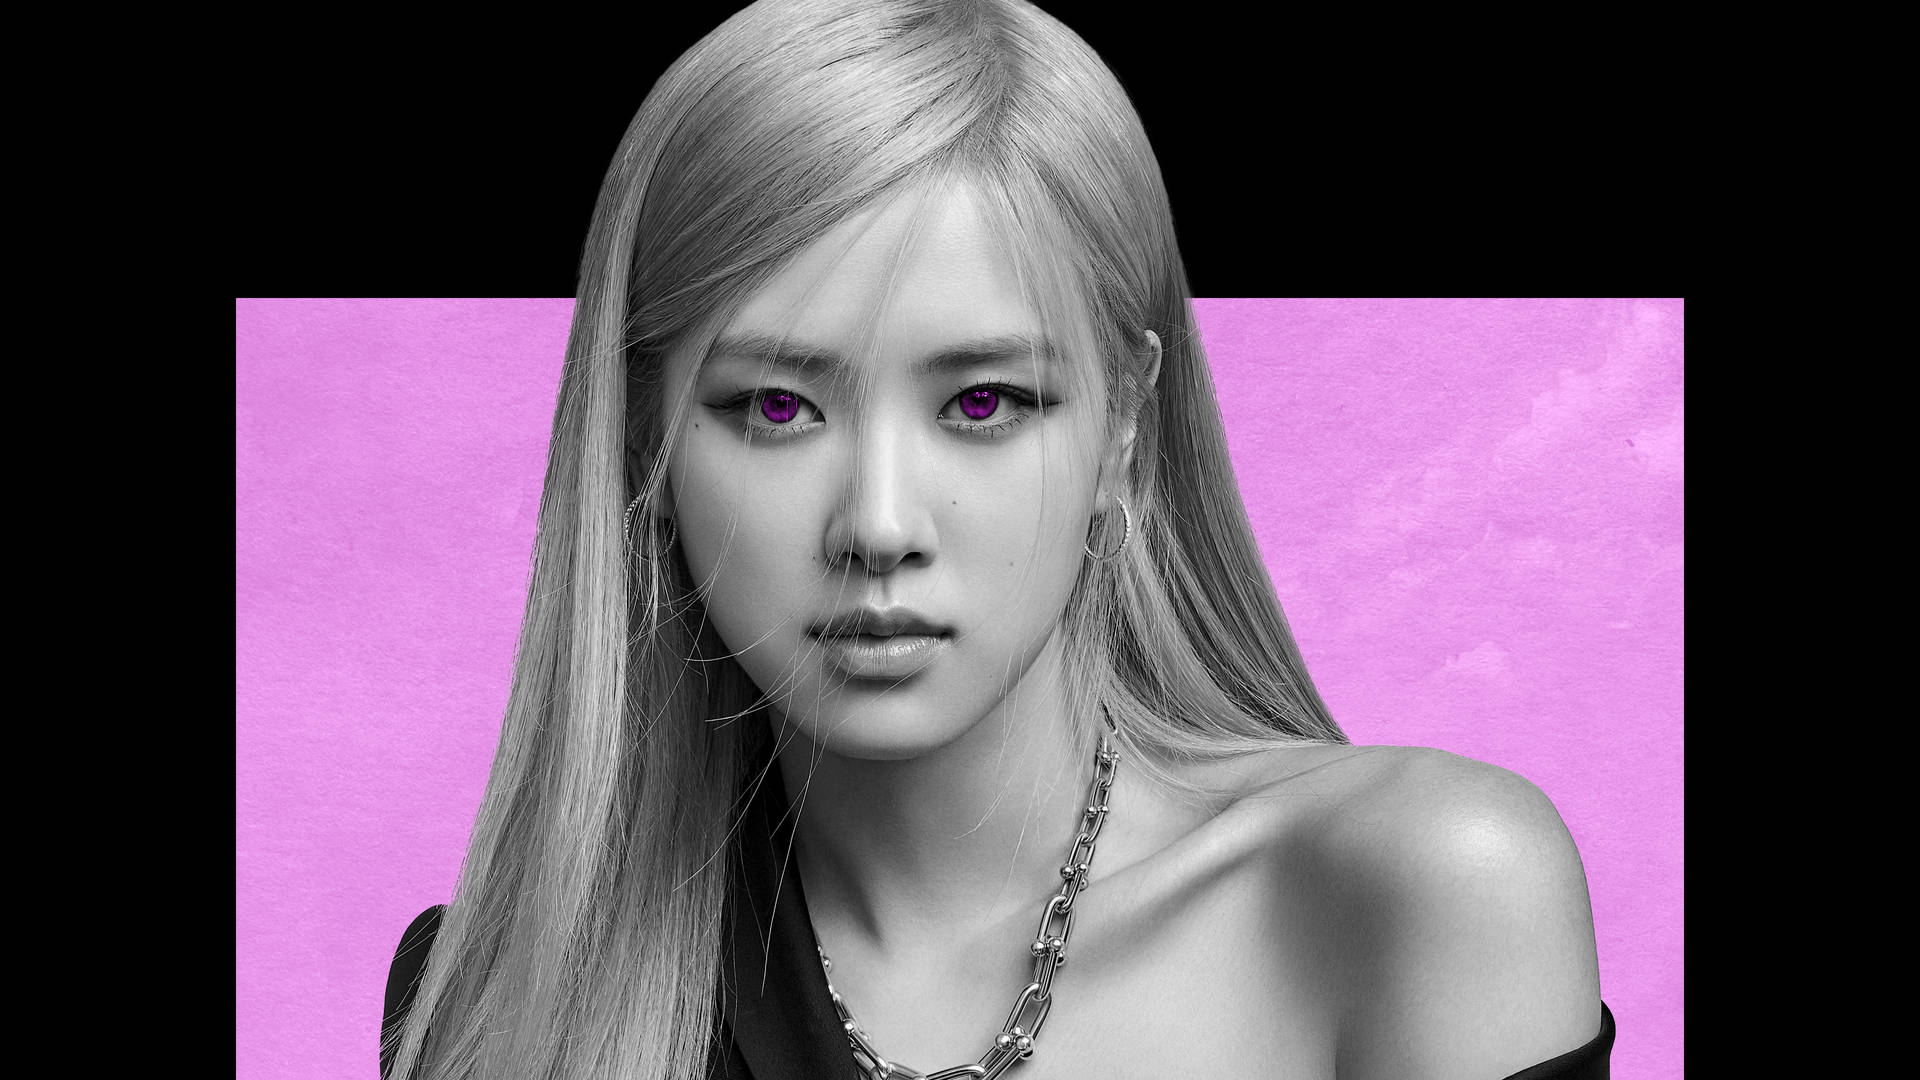 Chic Rose Blackpink Colored Eyes